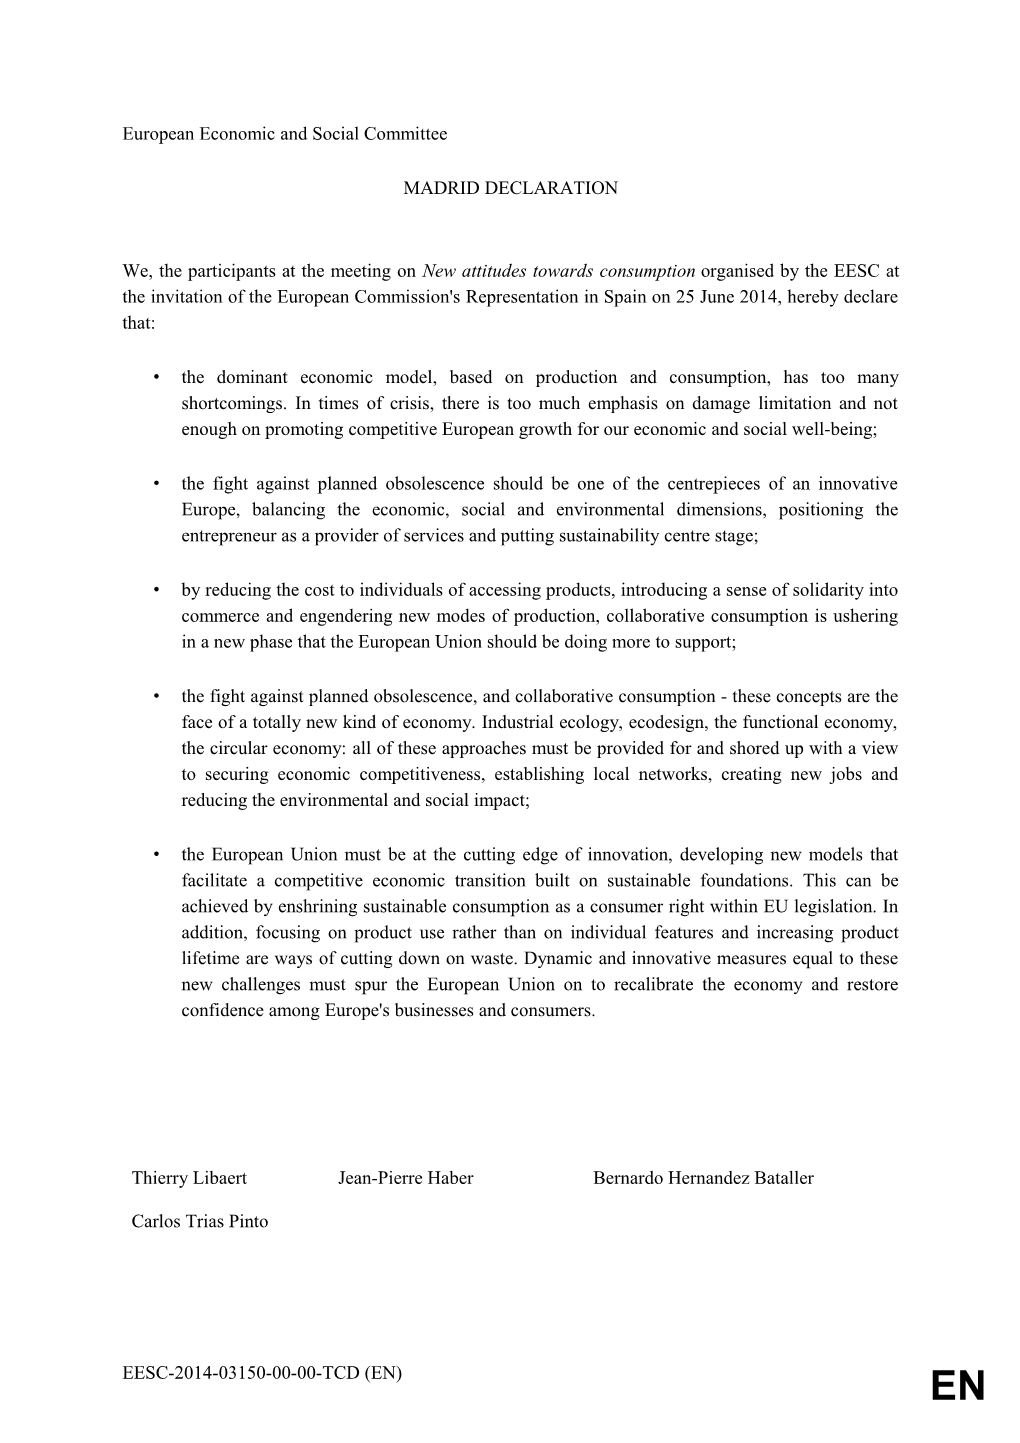 Text for the Madrid Conference on 25 June